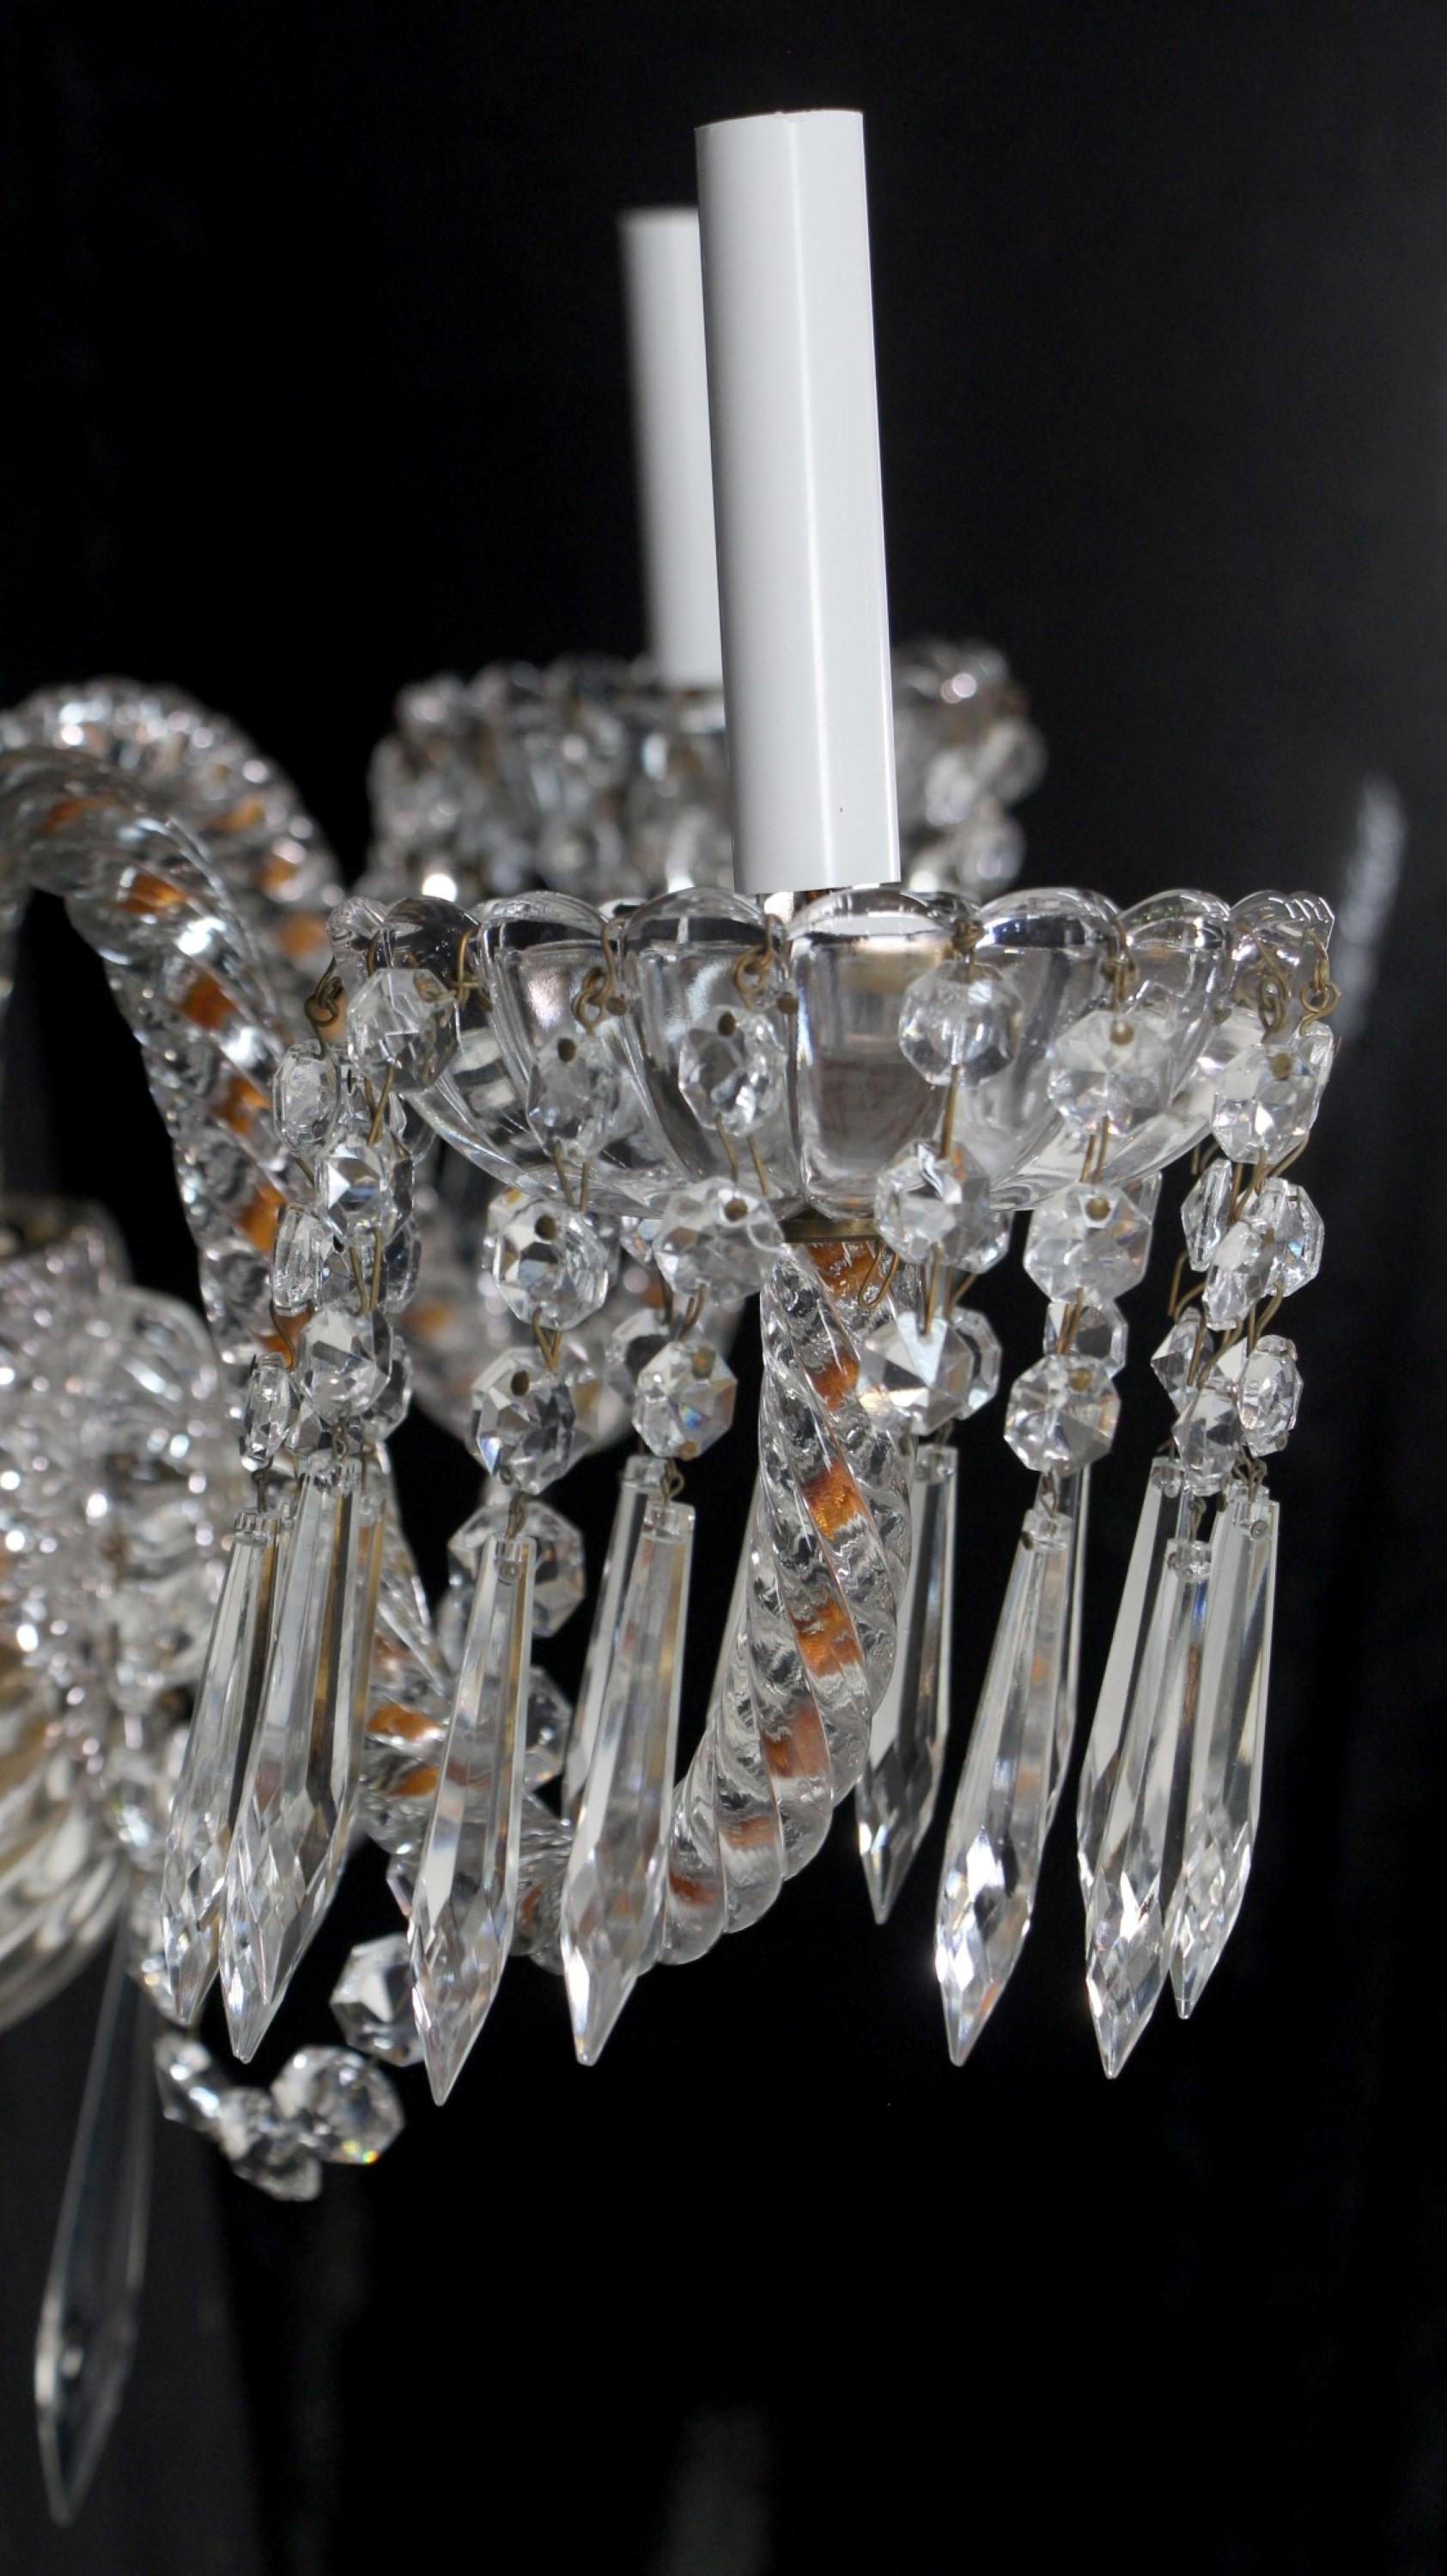 Crystal Sconce Hotel Pennsylvania, NYC Quantity Available 4